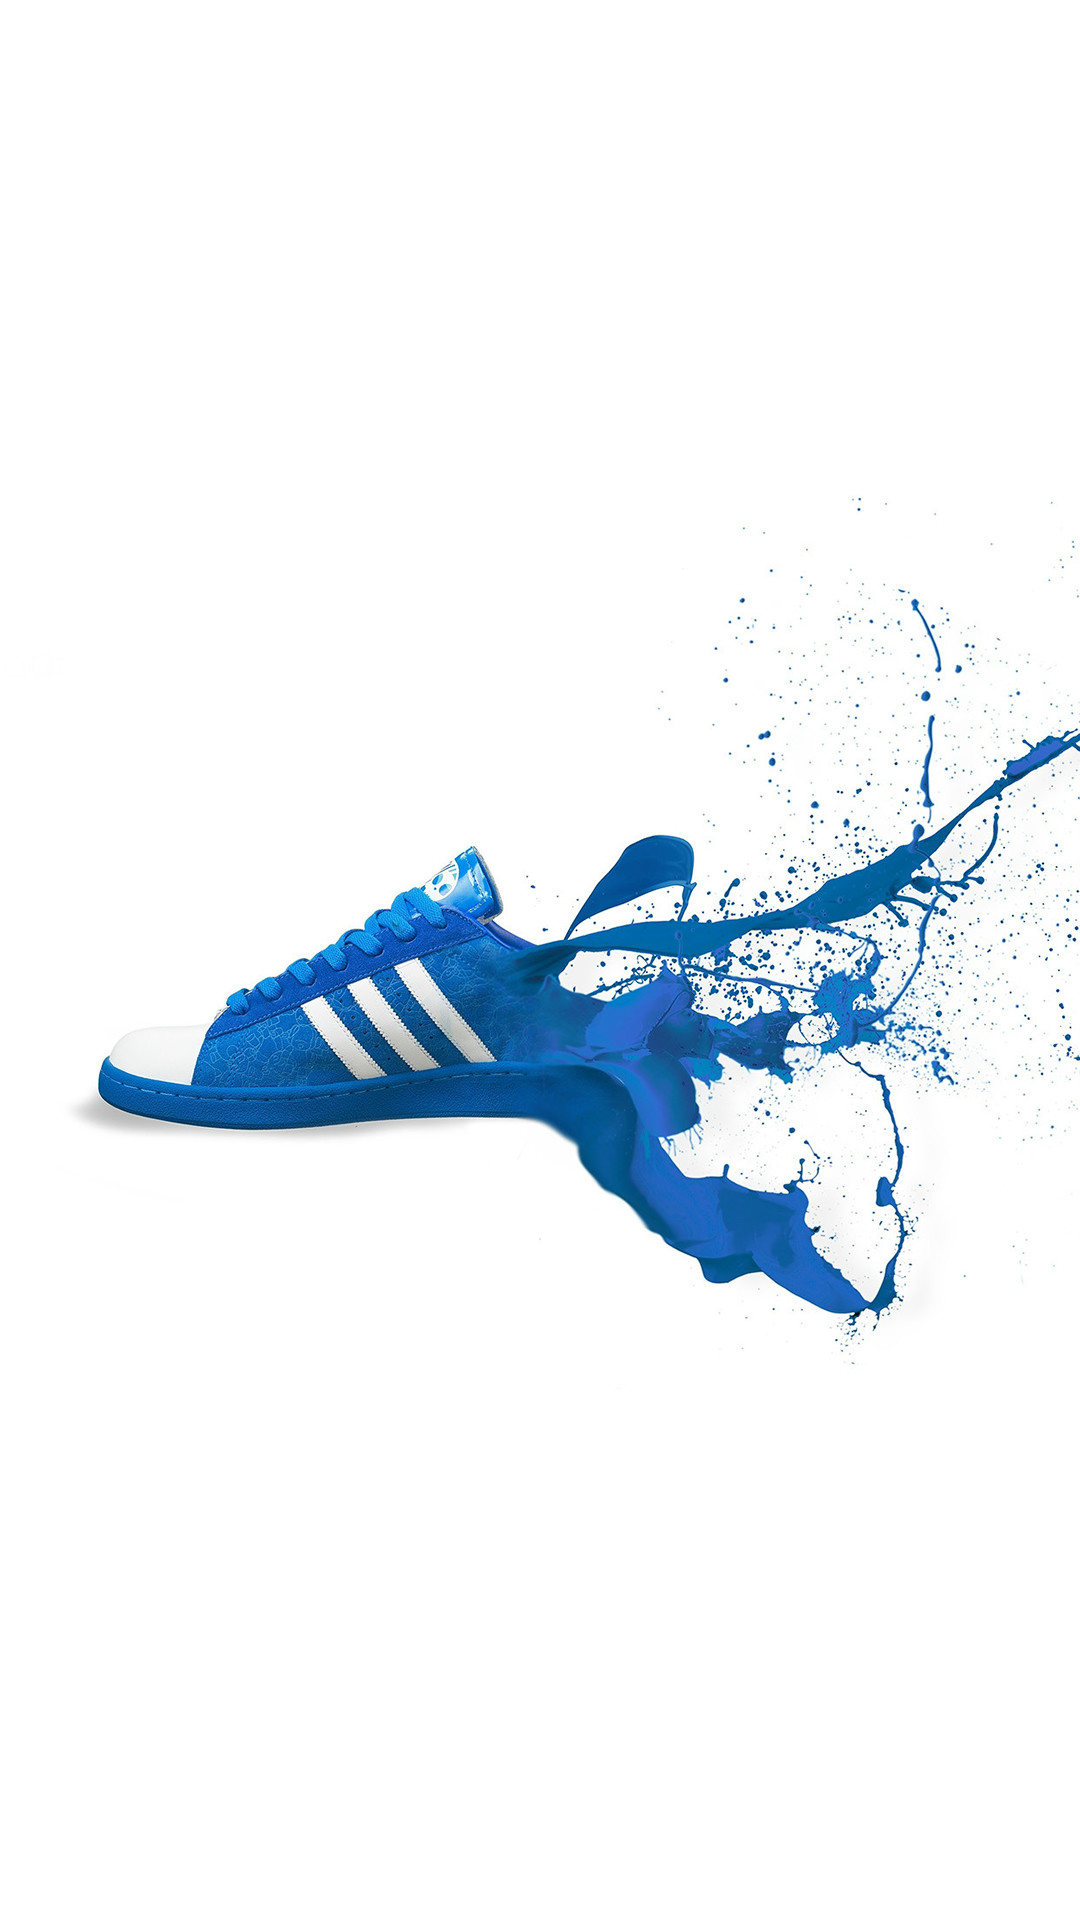 1080x1920 adidas blue shoes sneakers logo art iphone wallpaper desktop images  download free amazing colourful 4k picture artwork lovely 1080Ã1920  Wallpaper HD